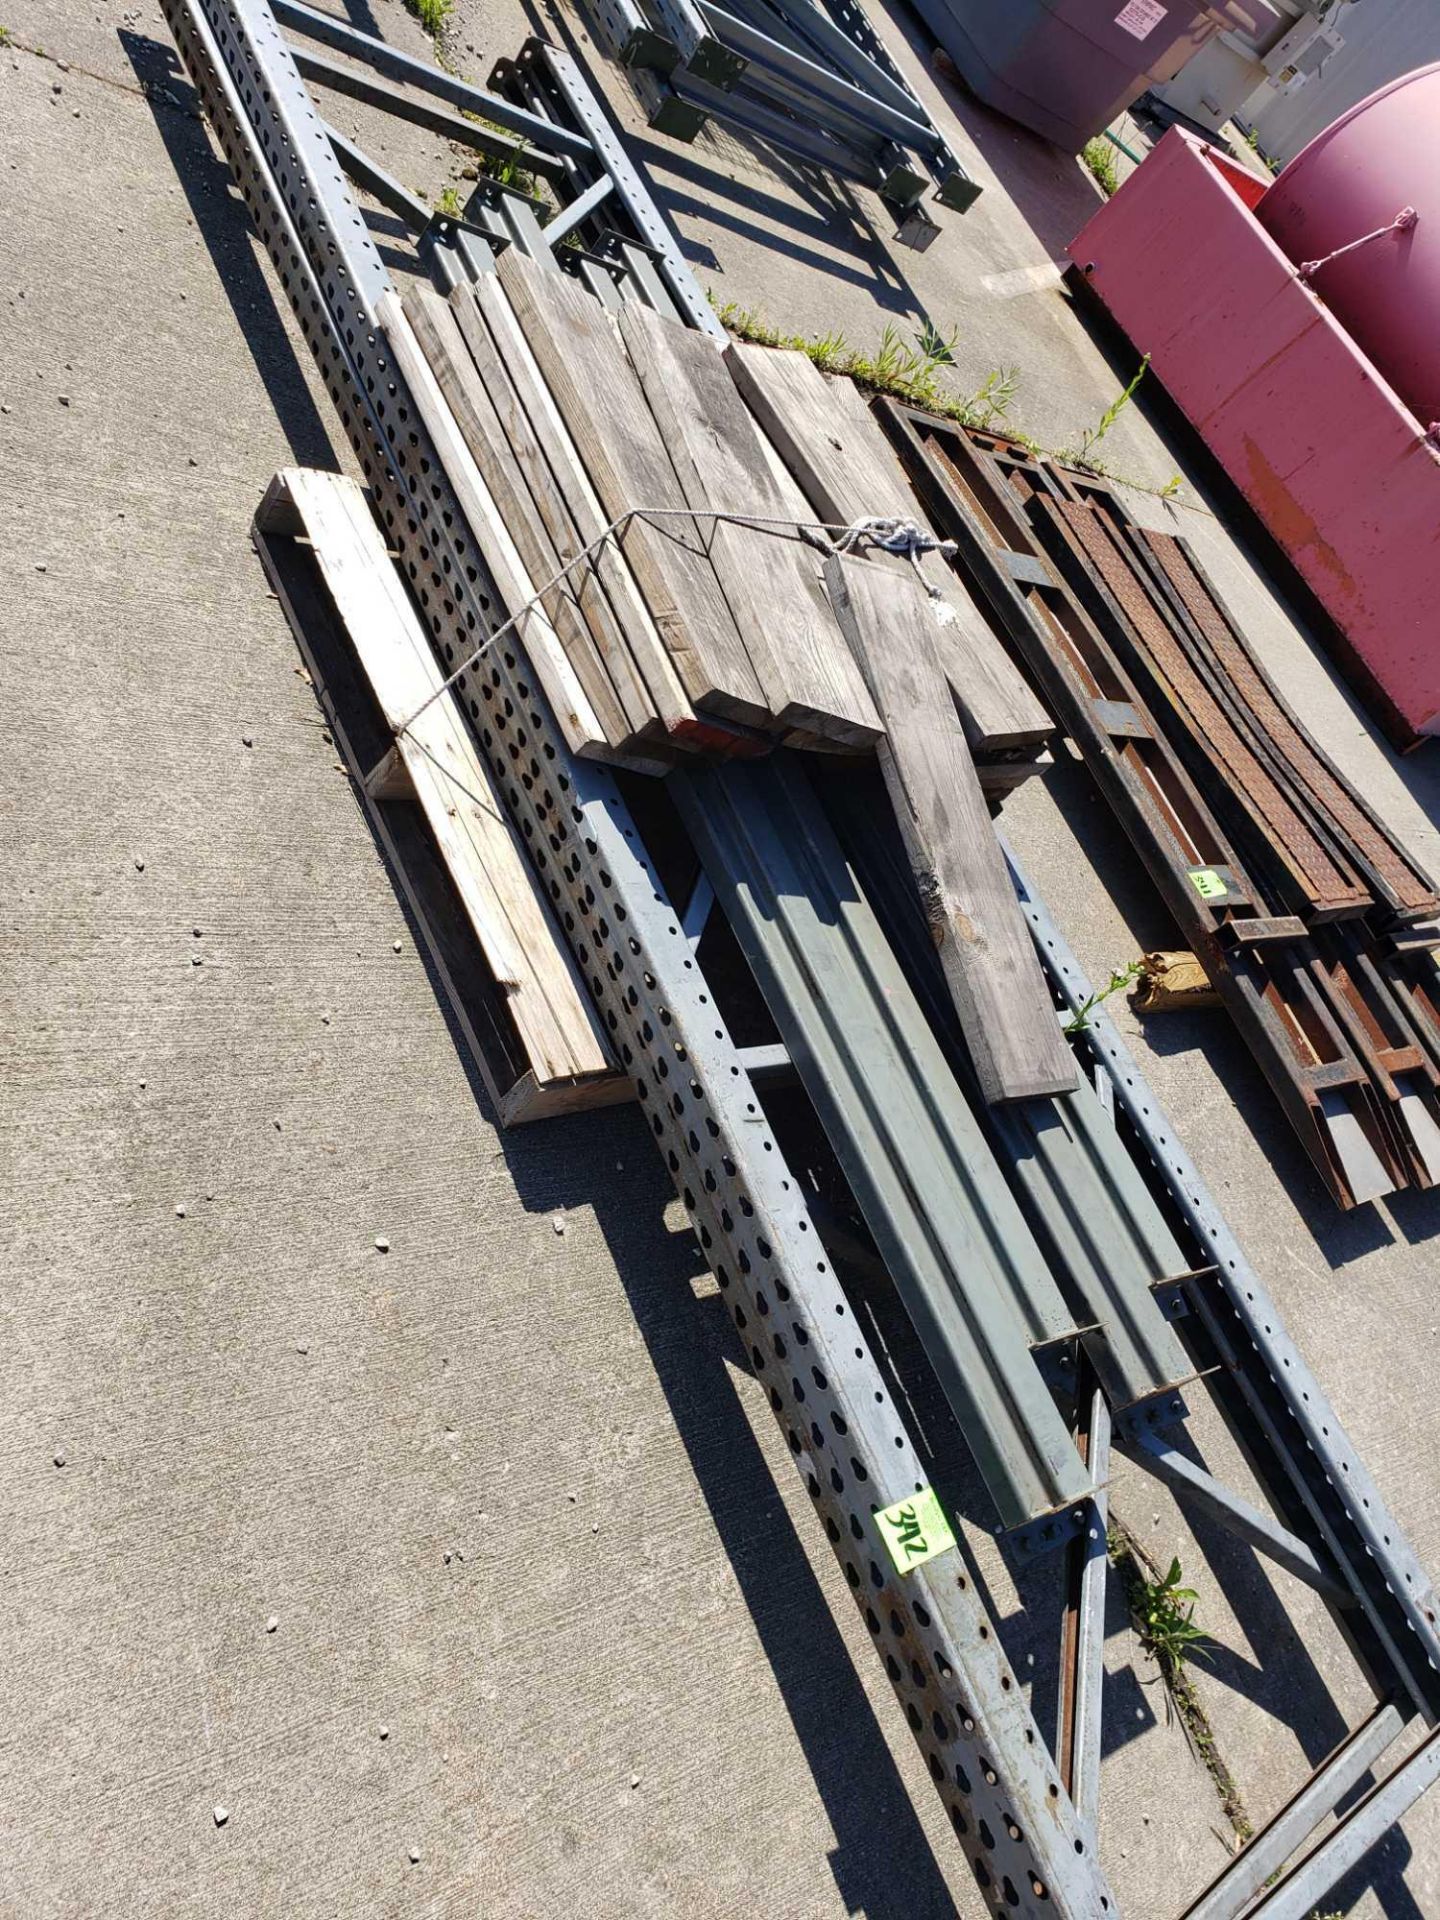 Pallet racking as pictured.